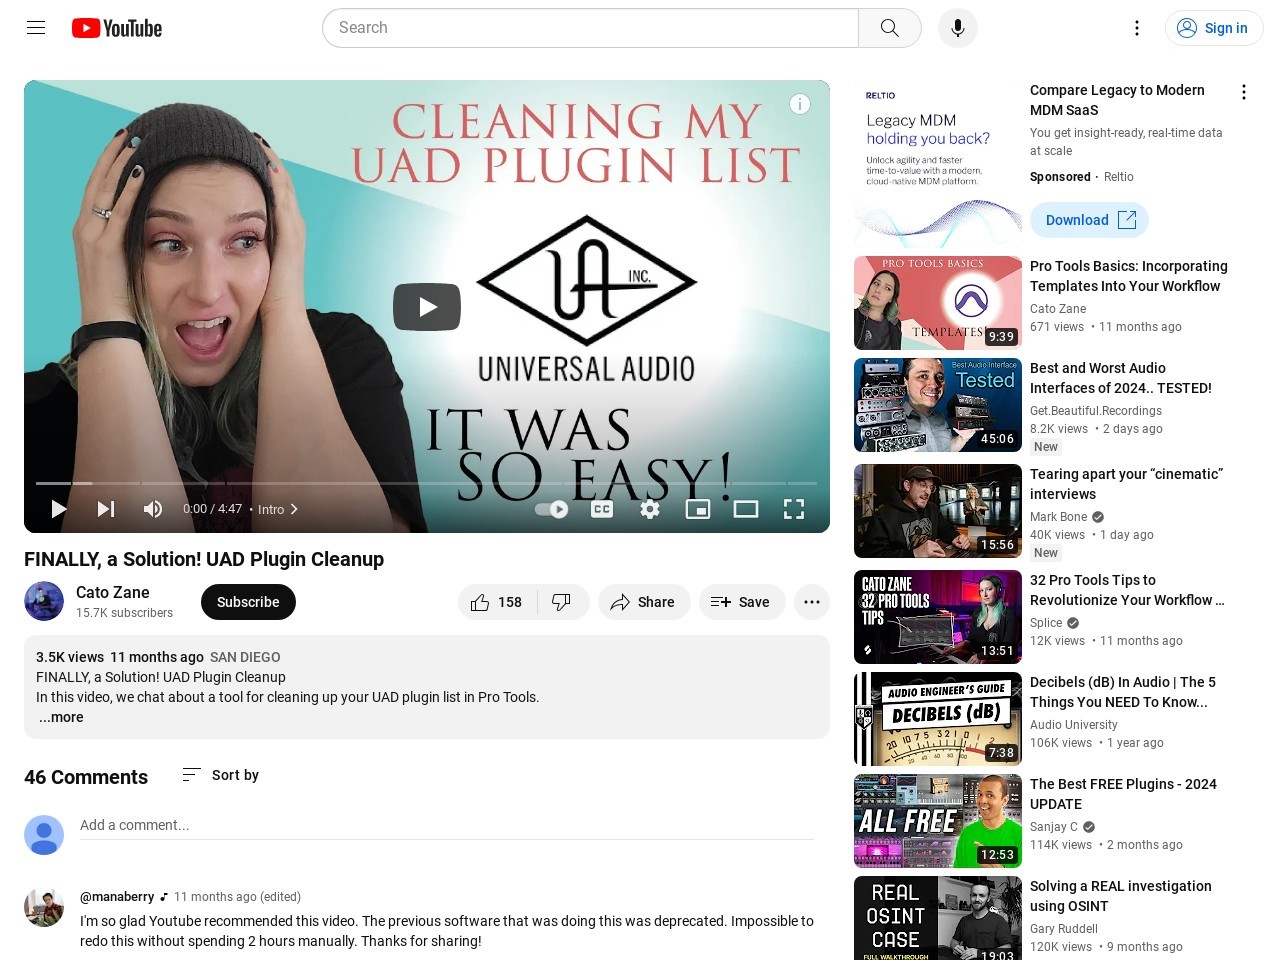 FINALLY, a Solution! UAD Plugin Cleanup - YouTube